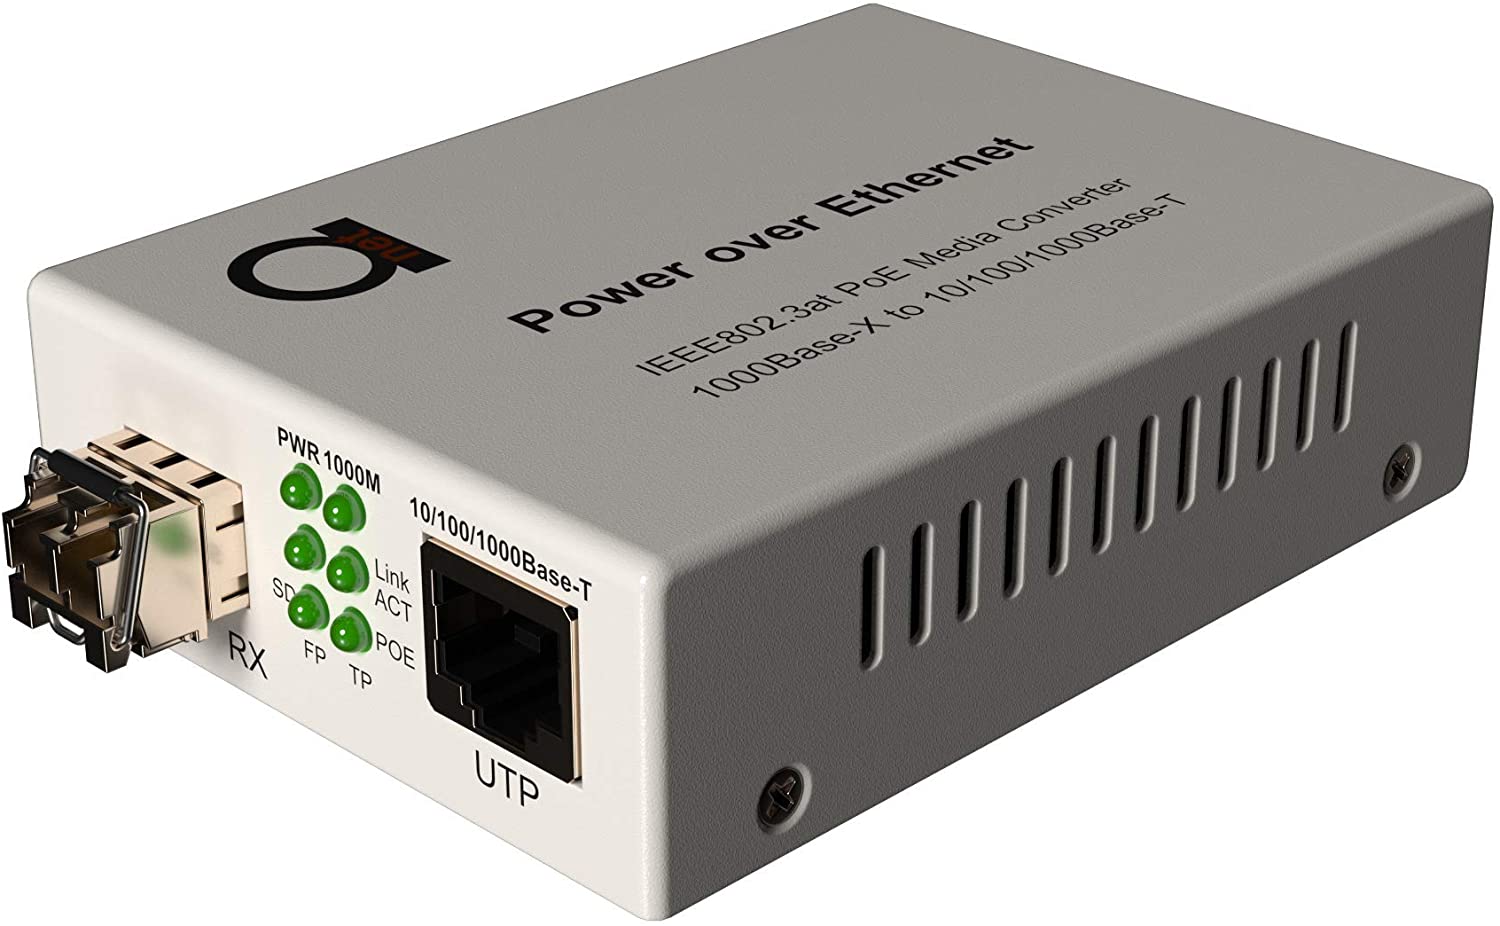 Add-onputer Peripherals L This Is A Media Converter That Converts A 10 